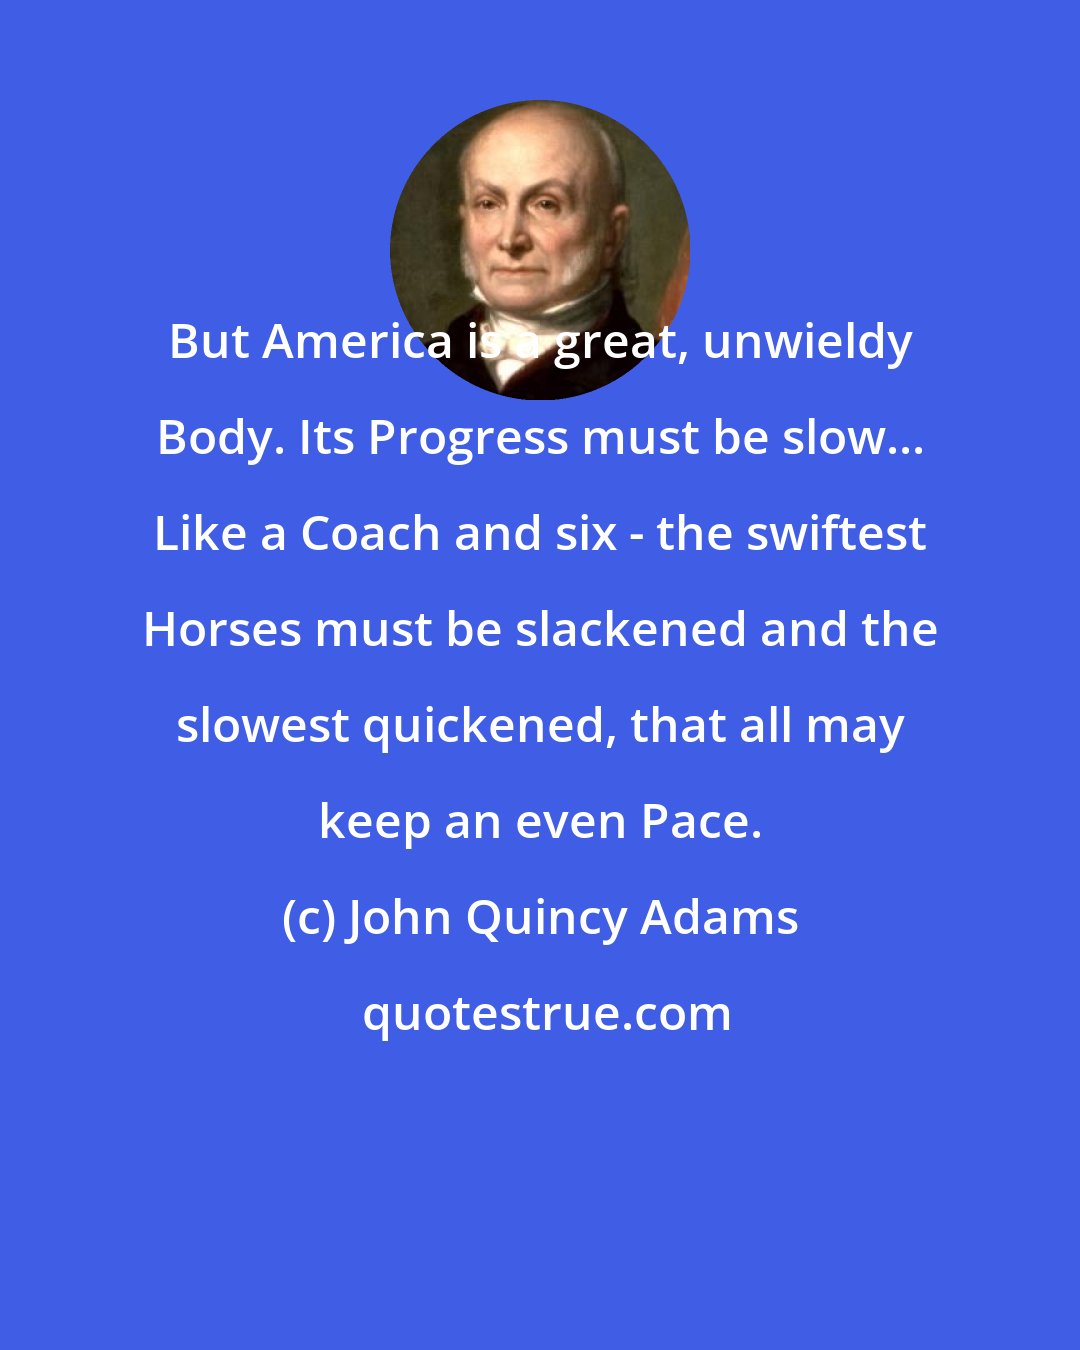 John Quincy Adams: But America is a great, unwieldy Body. Its Progress must be slow... Like a Coach and six - the swiftest Horses must be slackened and the slowest quickened, that all may keep an even Pace.